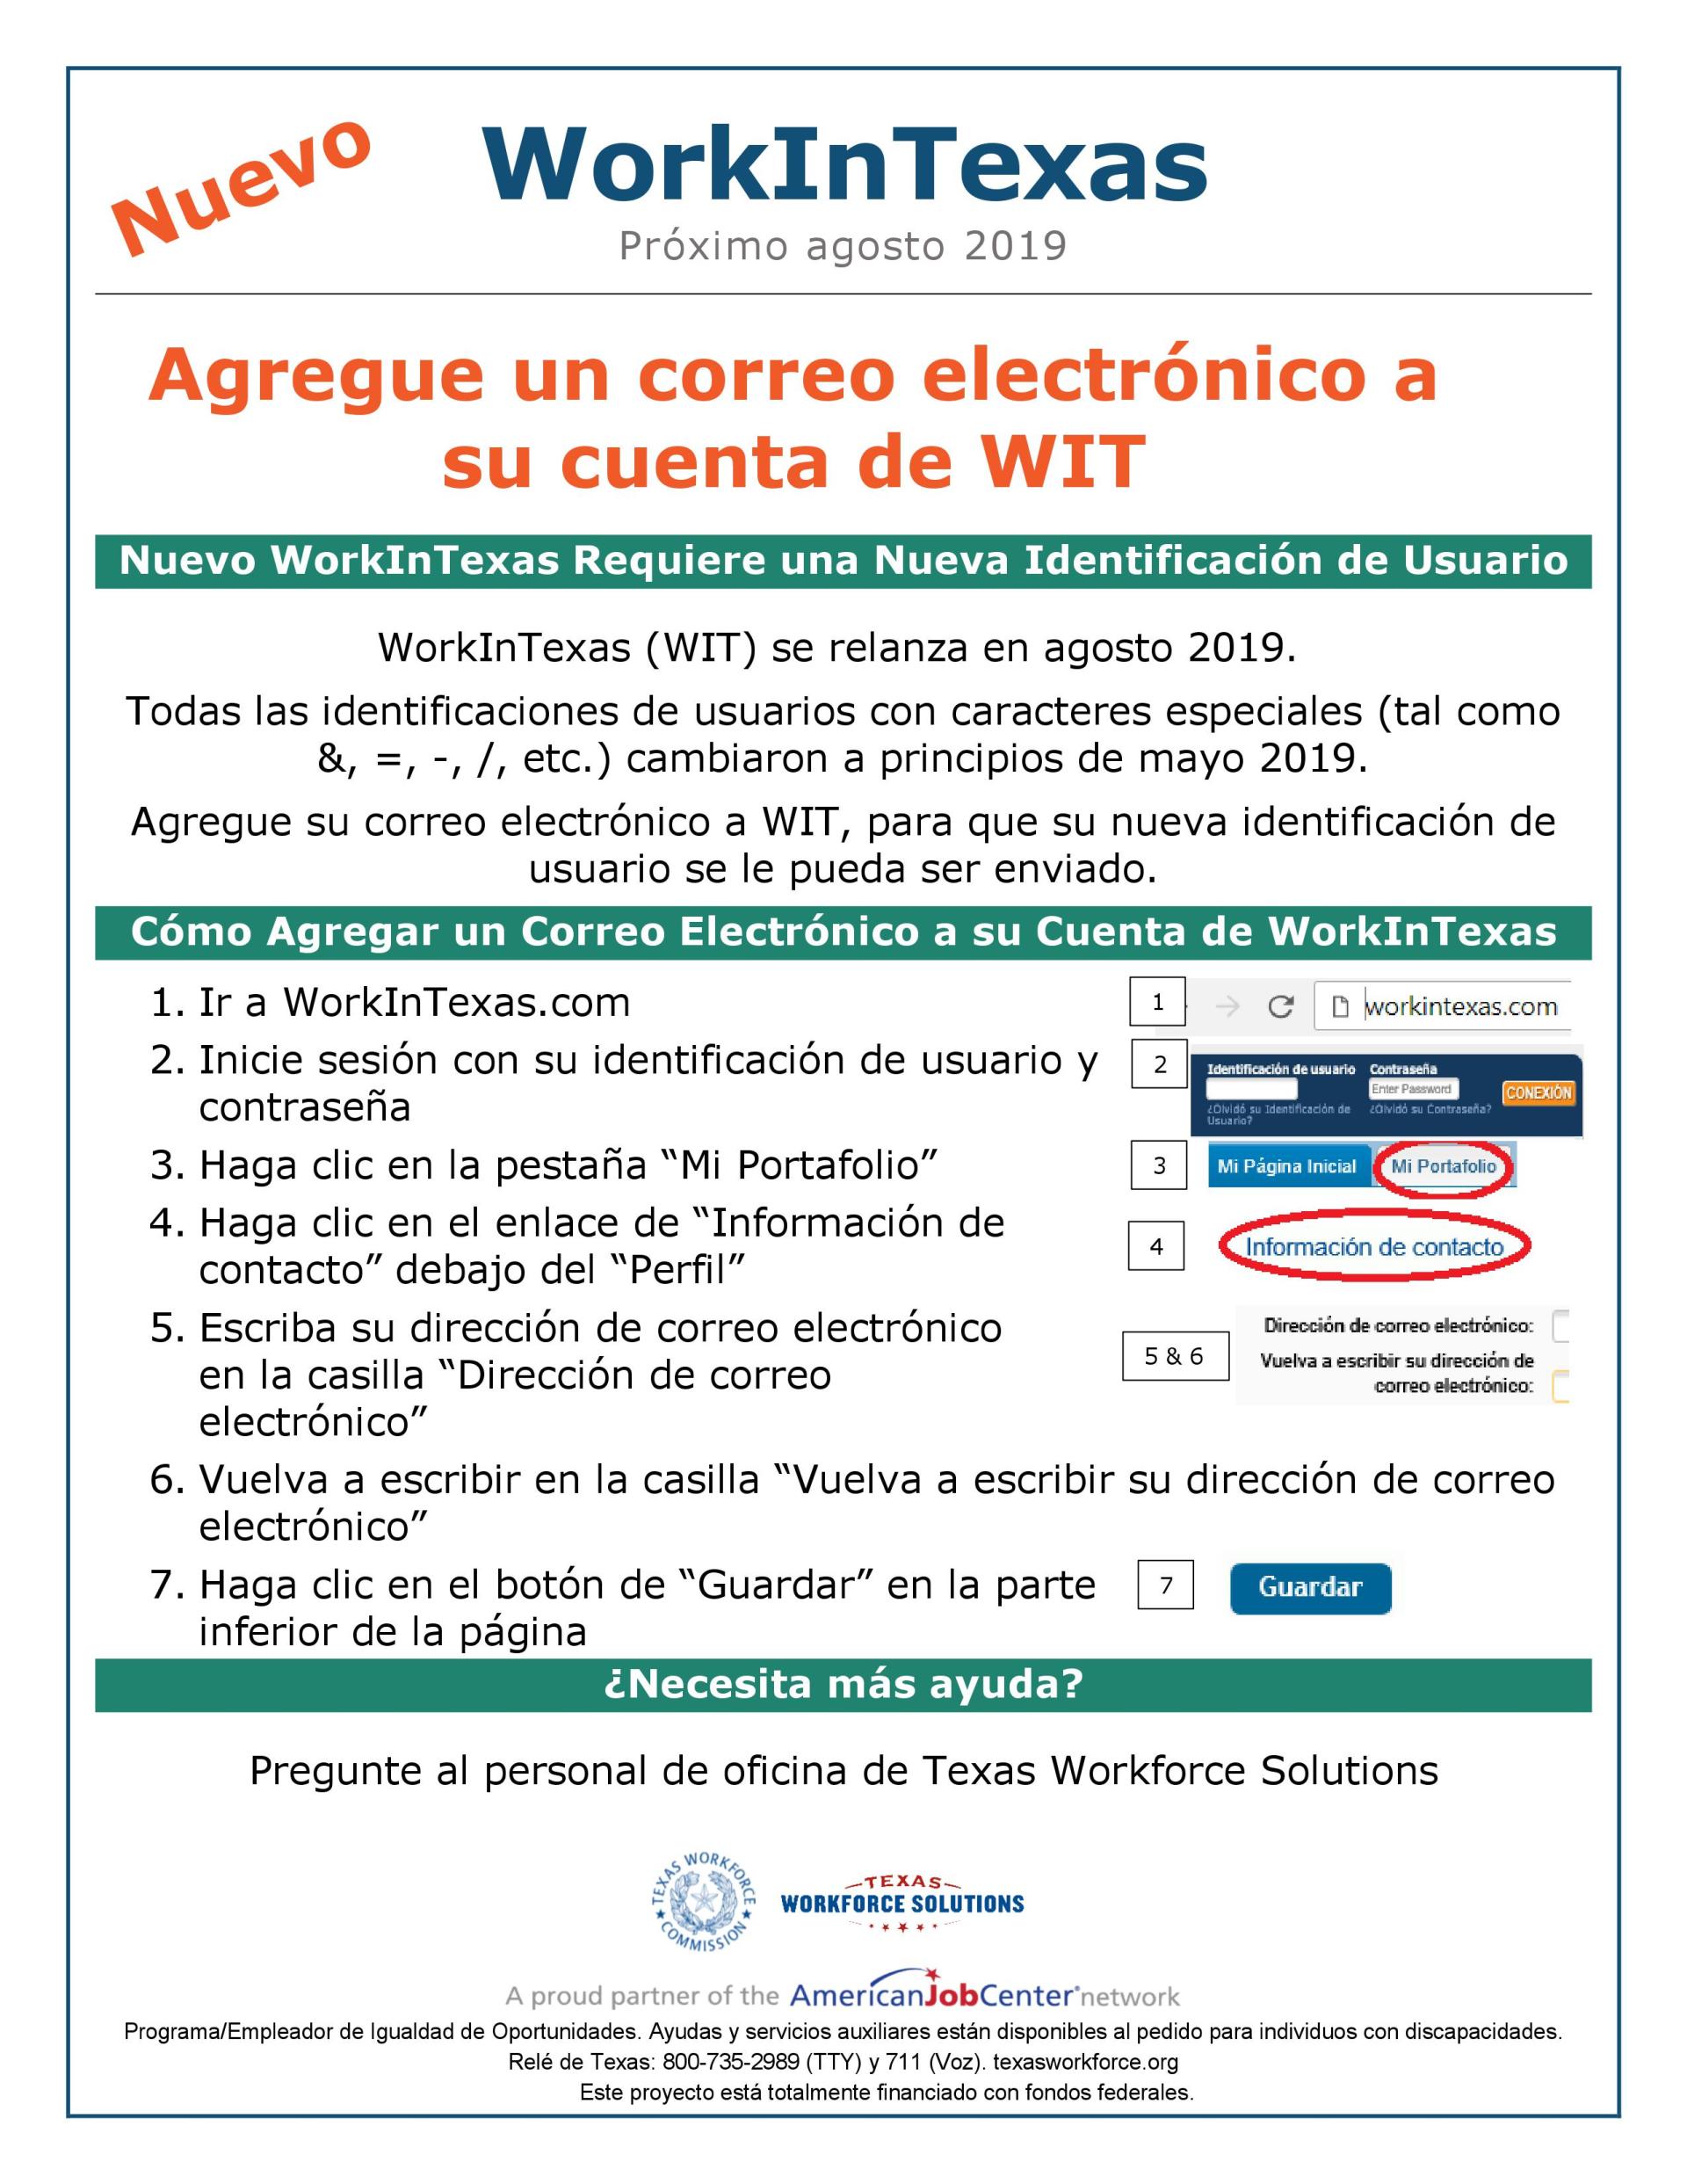 Flyer in Spanish for USER ID Changes